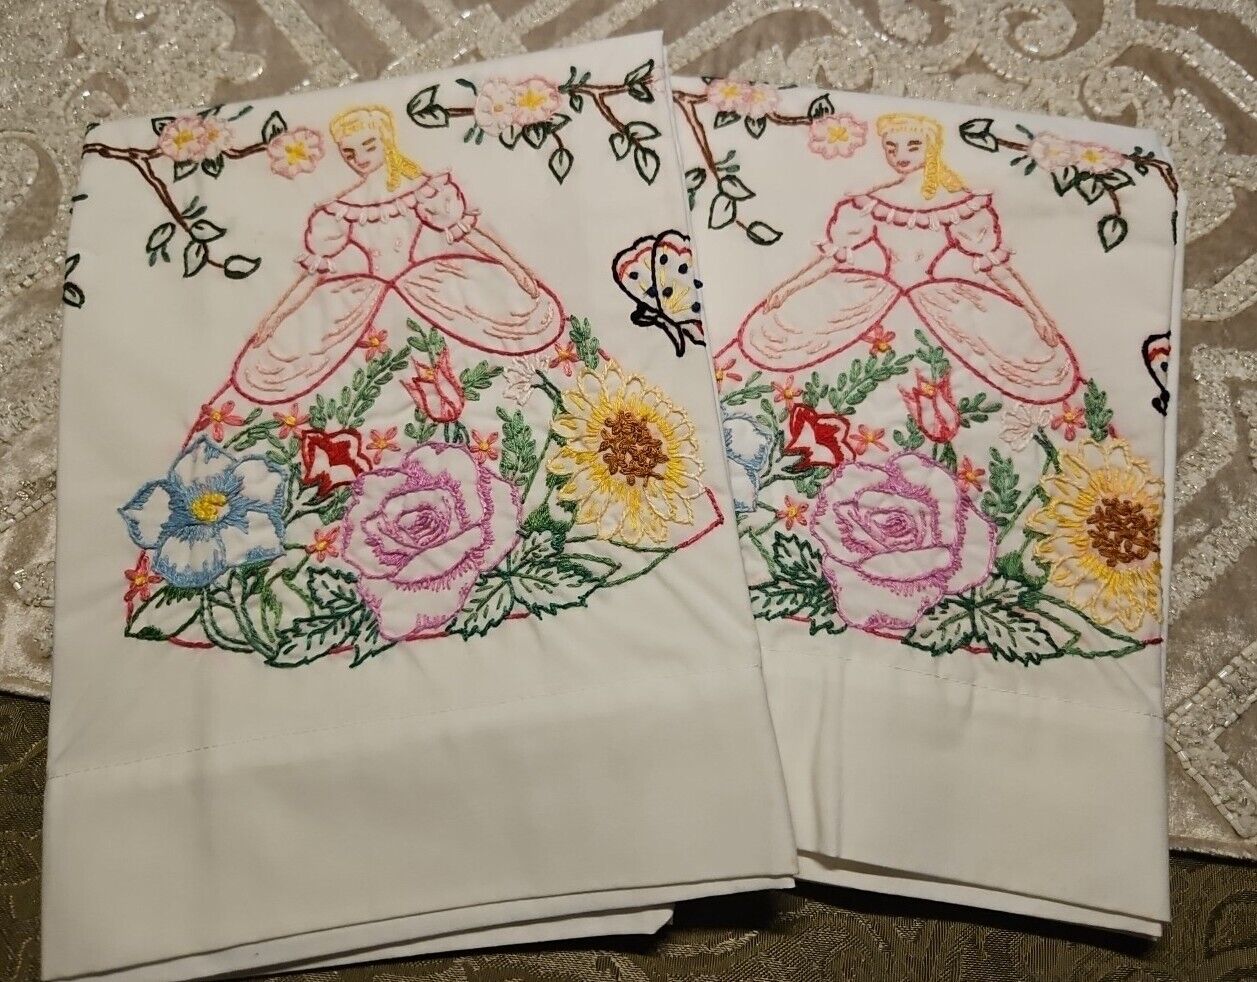 PAIR OF VINTAGE HANDMADE EMBROIDERED PILLOWCASES SOUTHERN BELLE BUTTERFLY FLORAL